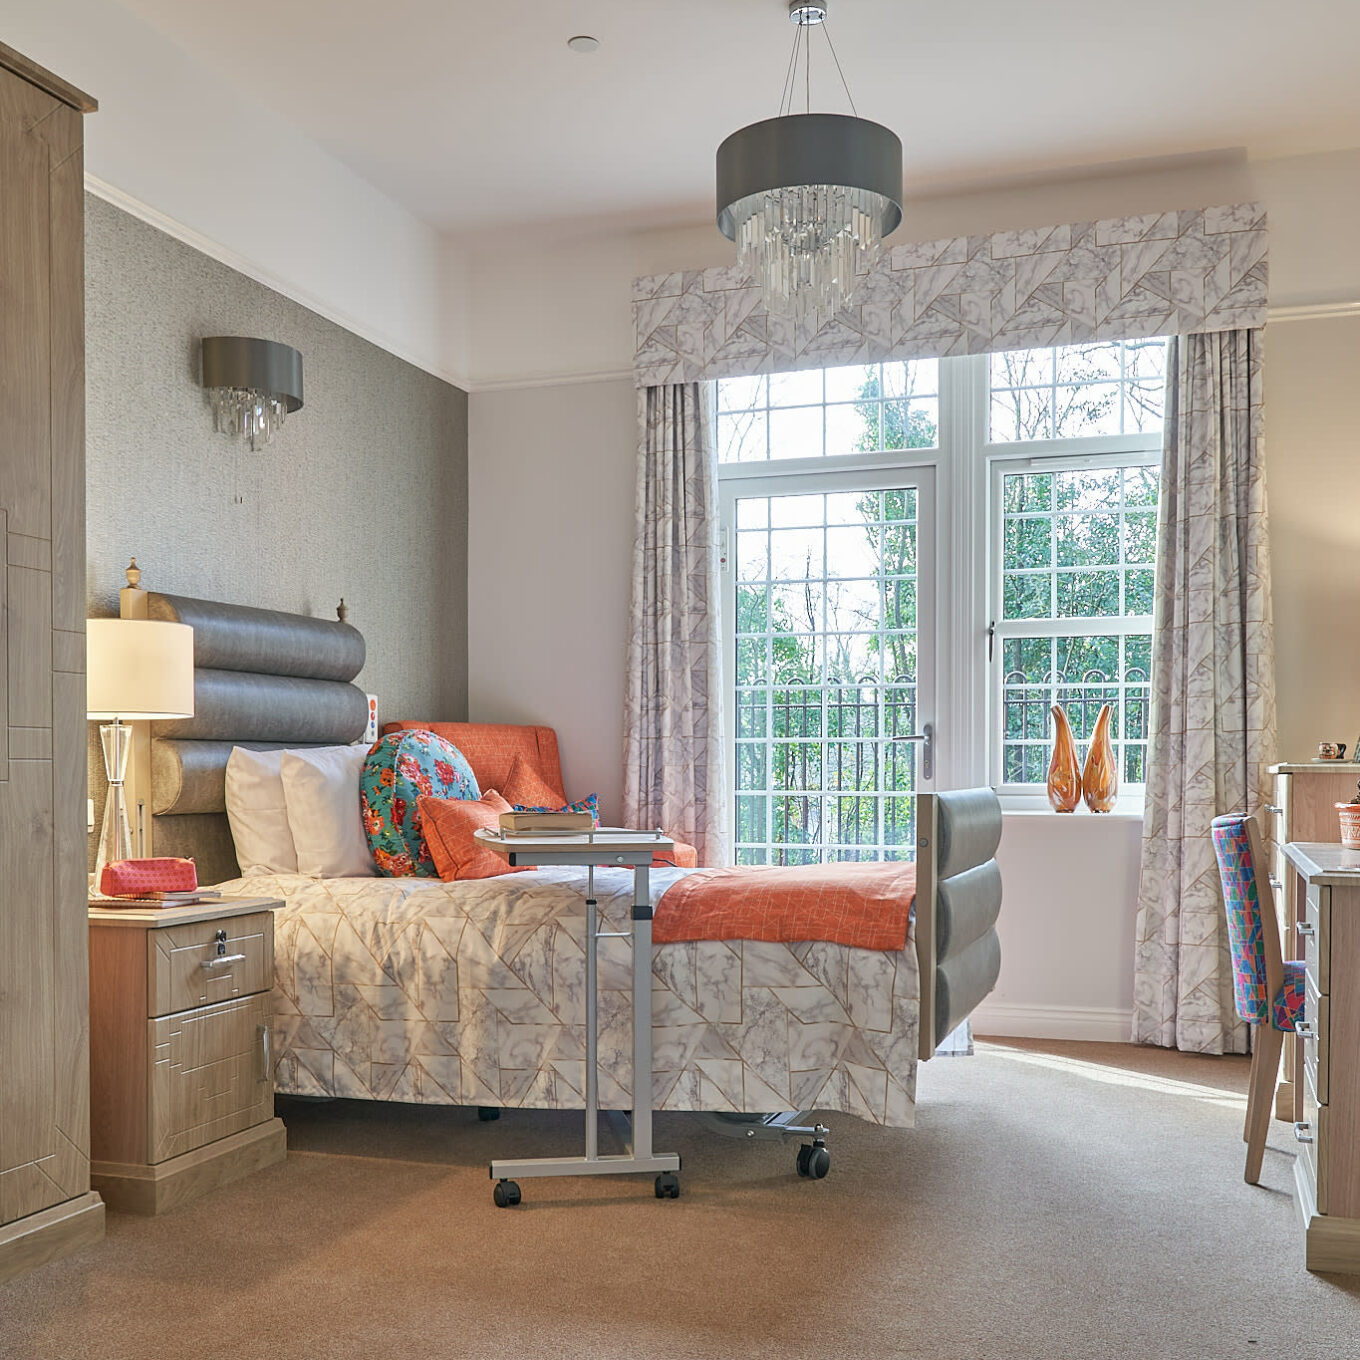 Bedroom with chandelier at Oakland Care Home in Chigwell